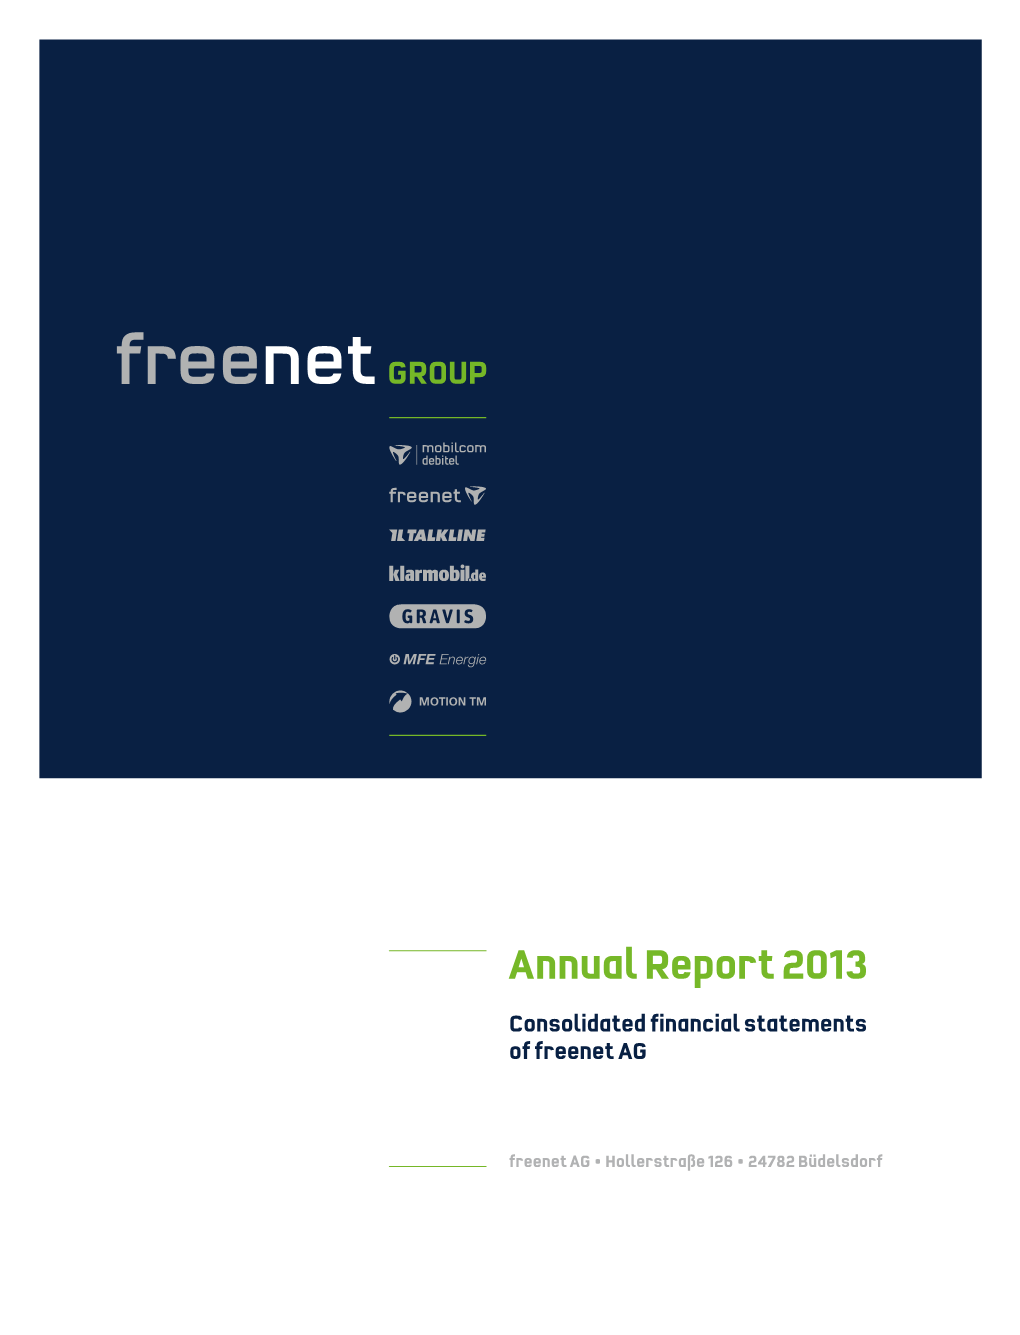 Annual Report 2013 Consolidated Financial Statements of Freenet AG